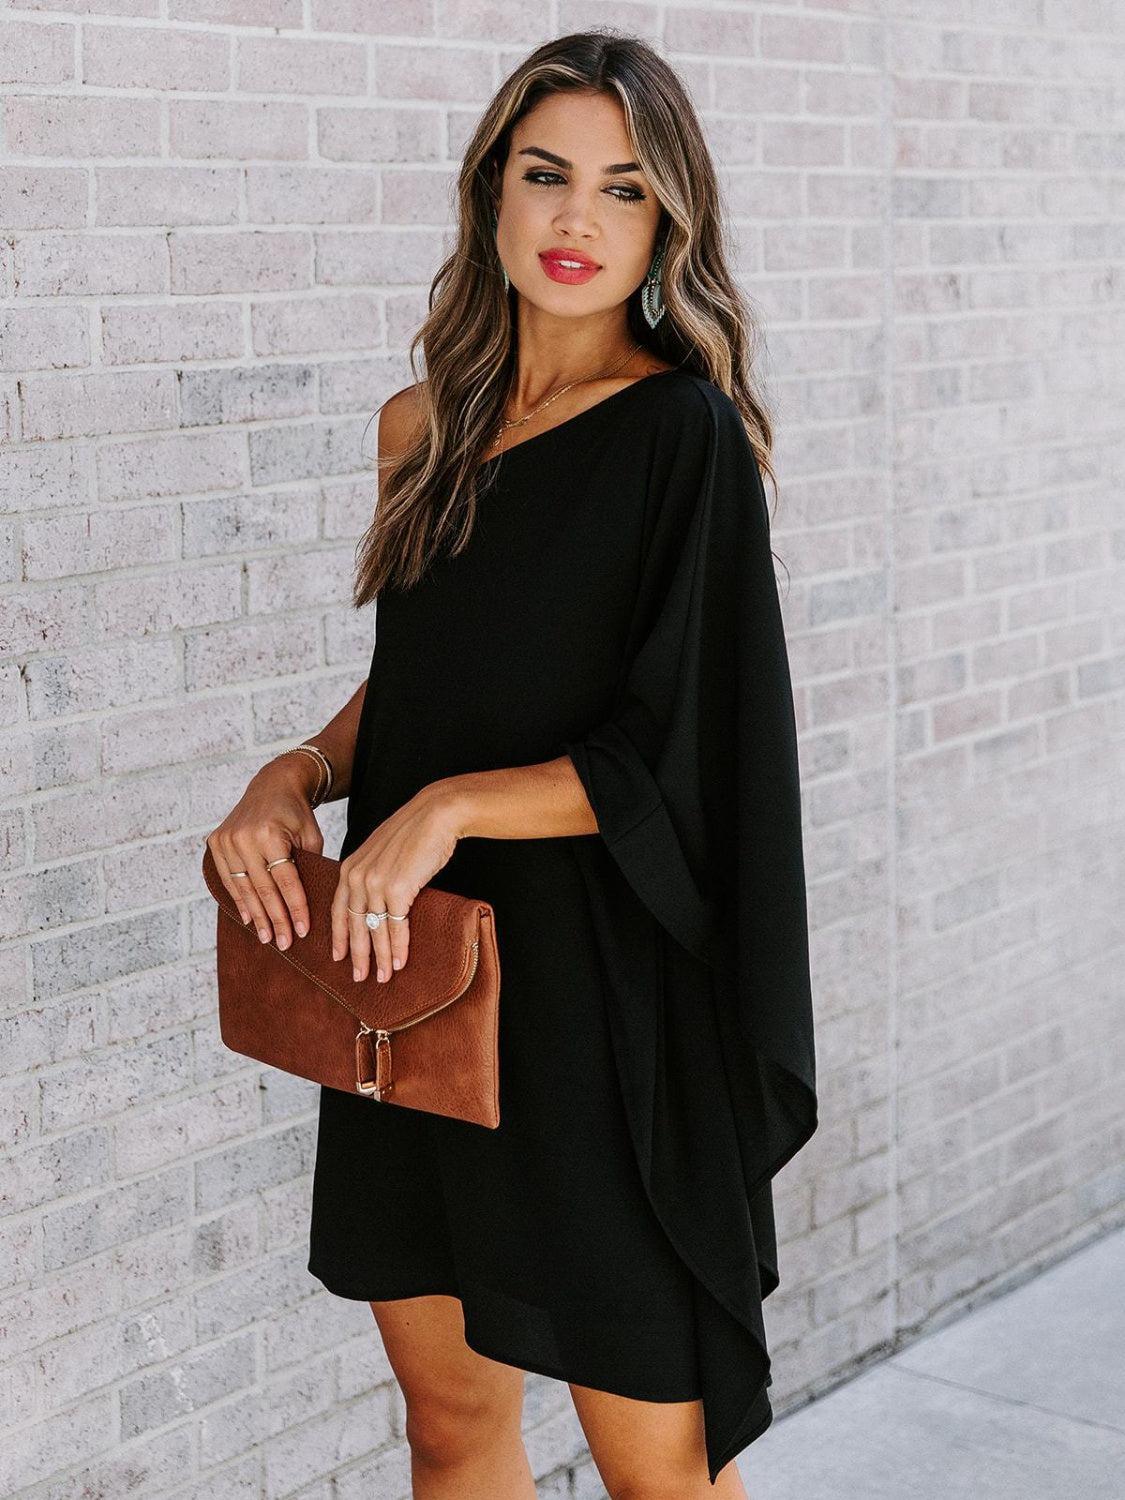 a woman wearing a black dress and a brown purse